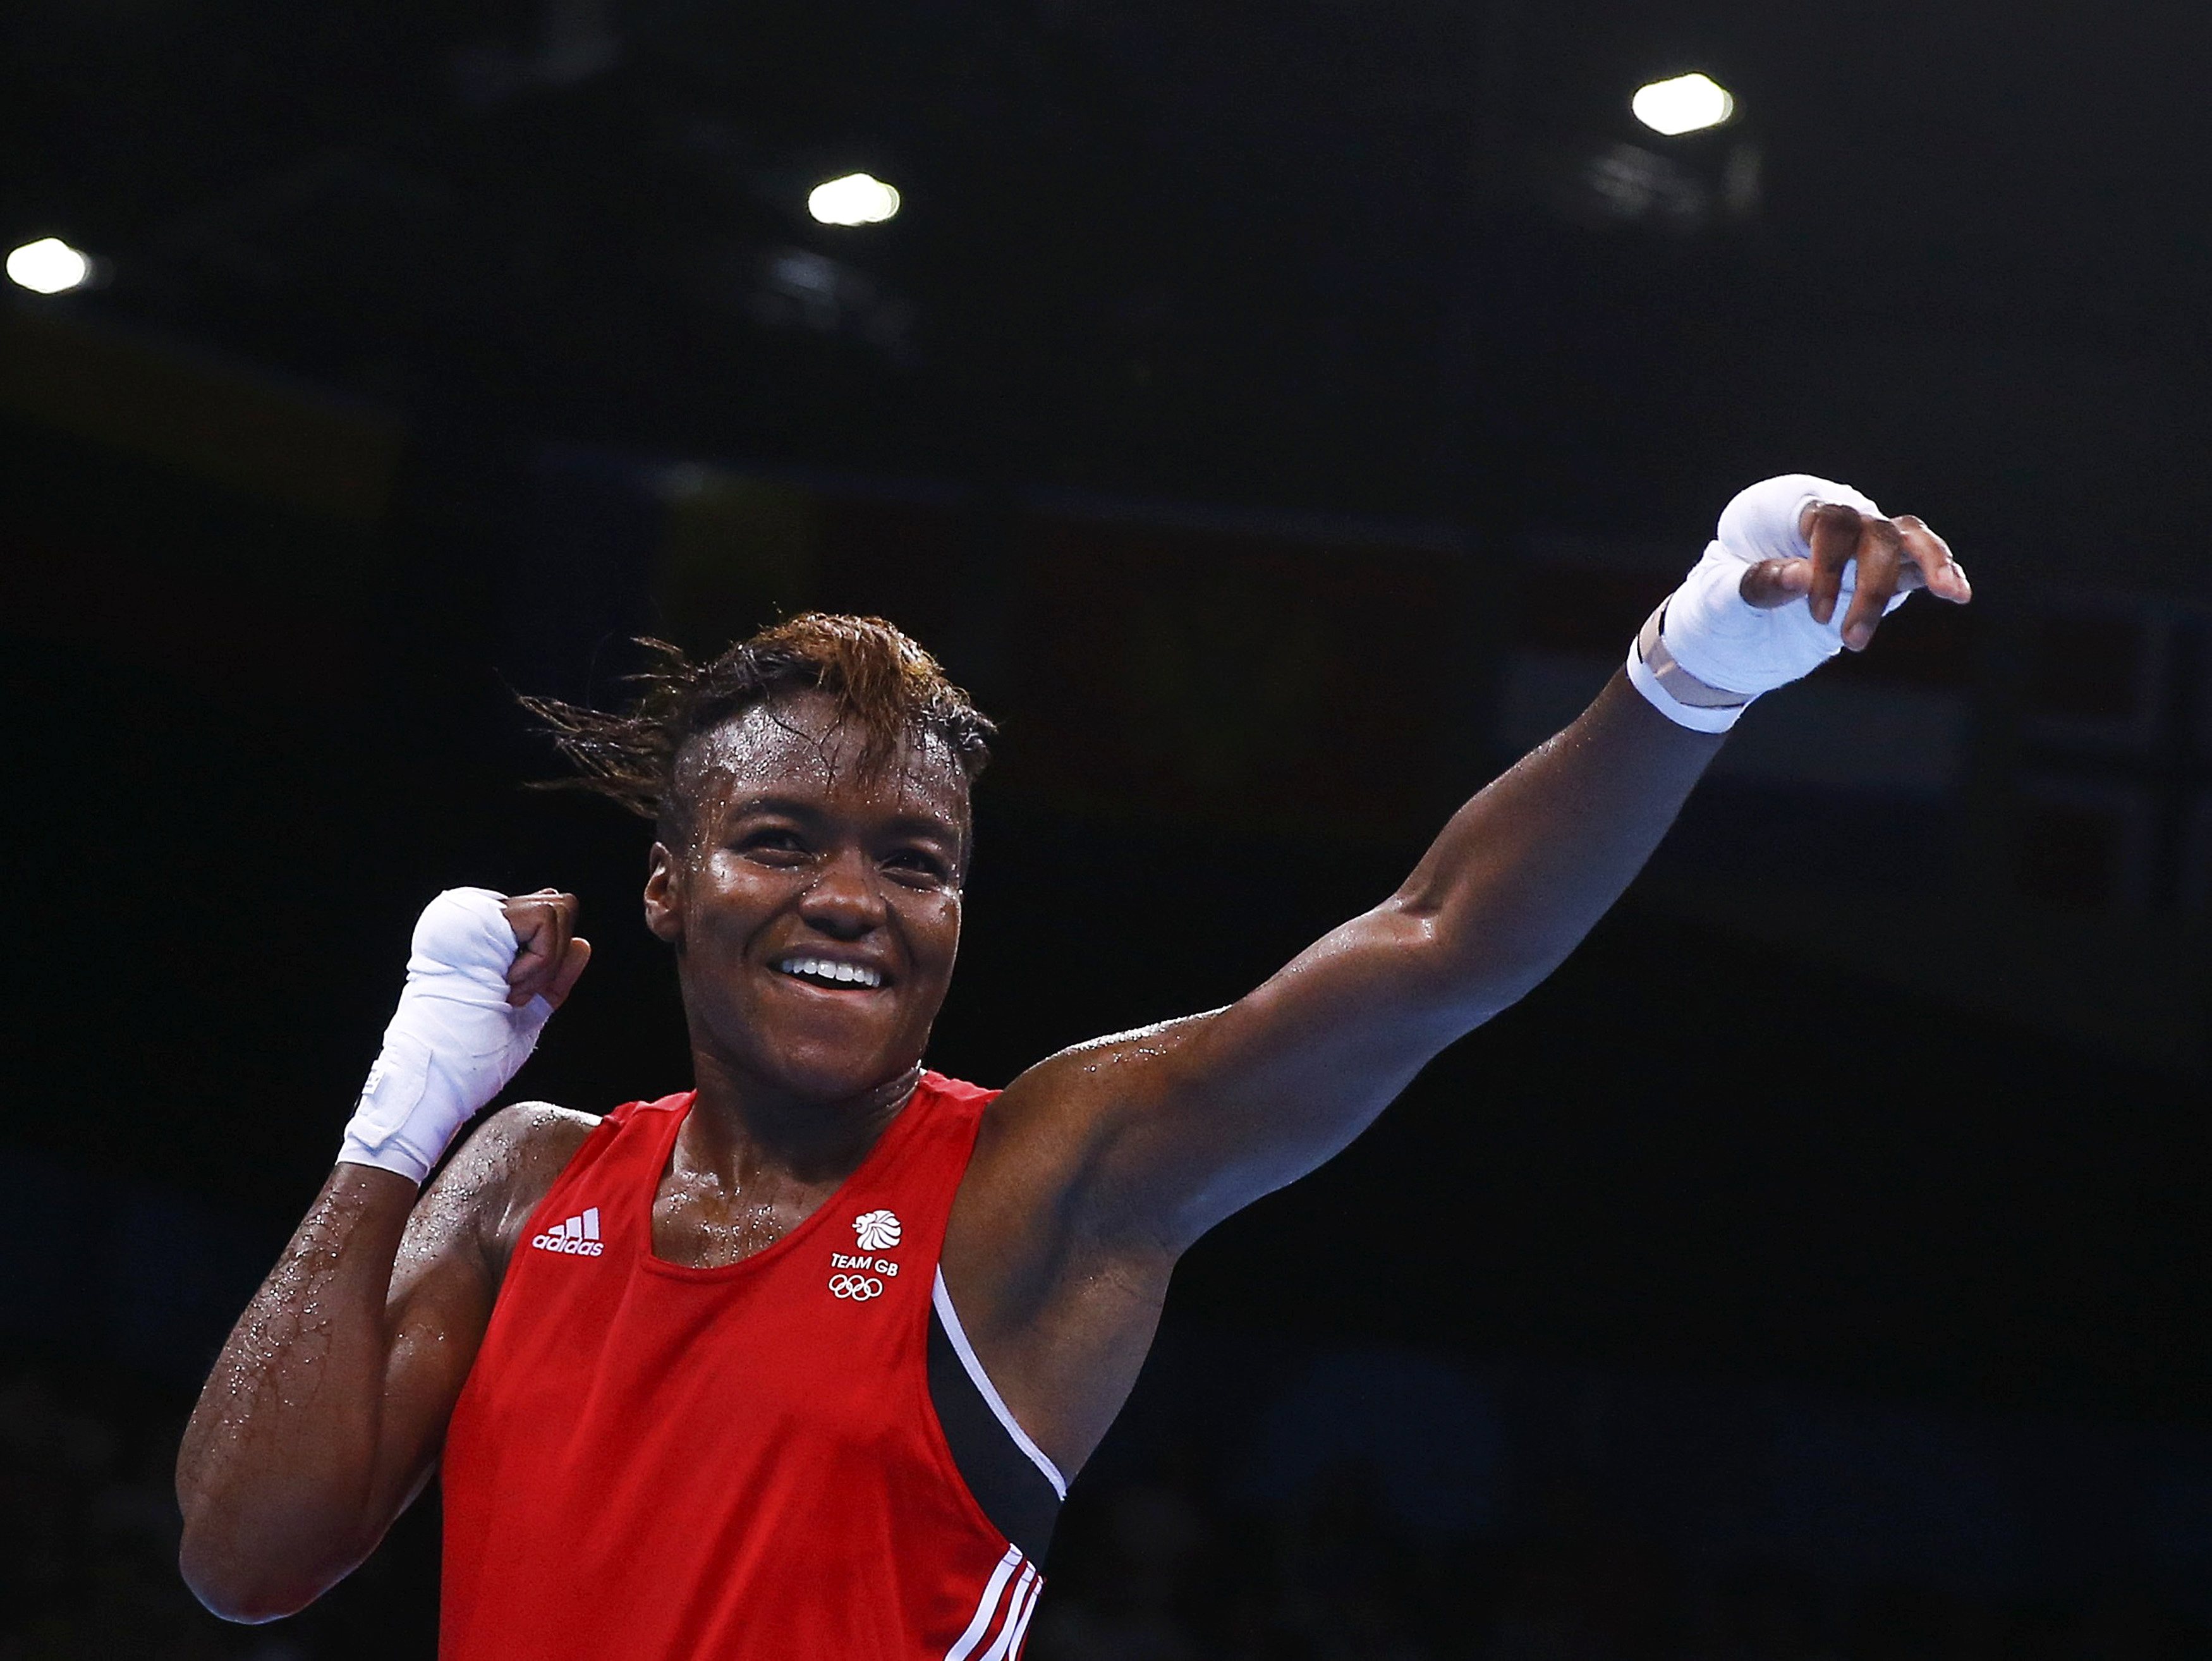 Adams of Britain reacts after winning her 51kg women's Fly weight boxing final fight at the 1st European Games in Baku